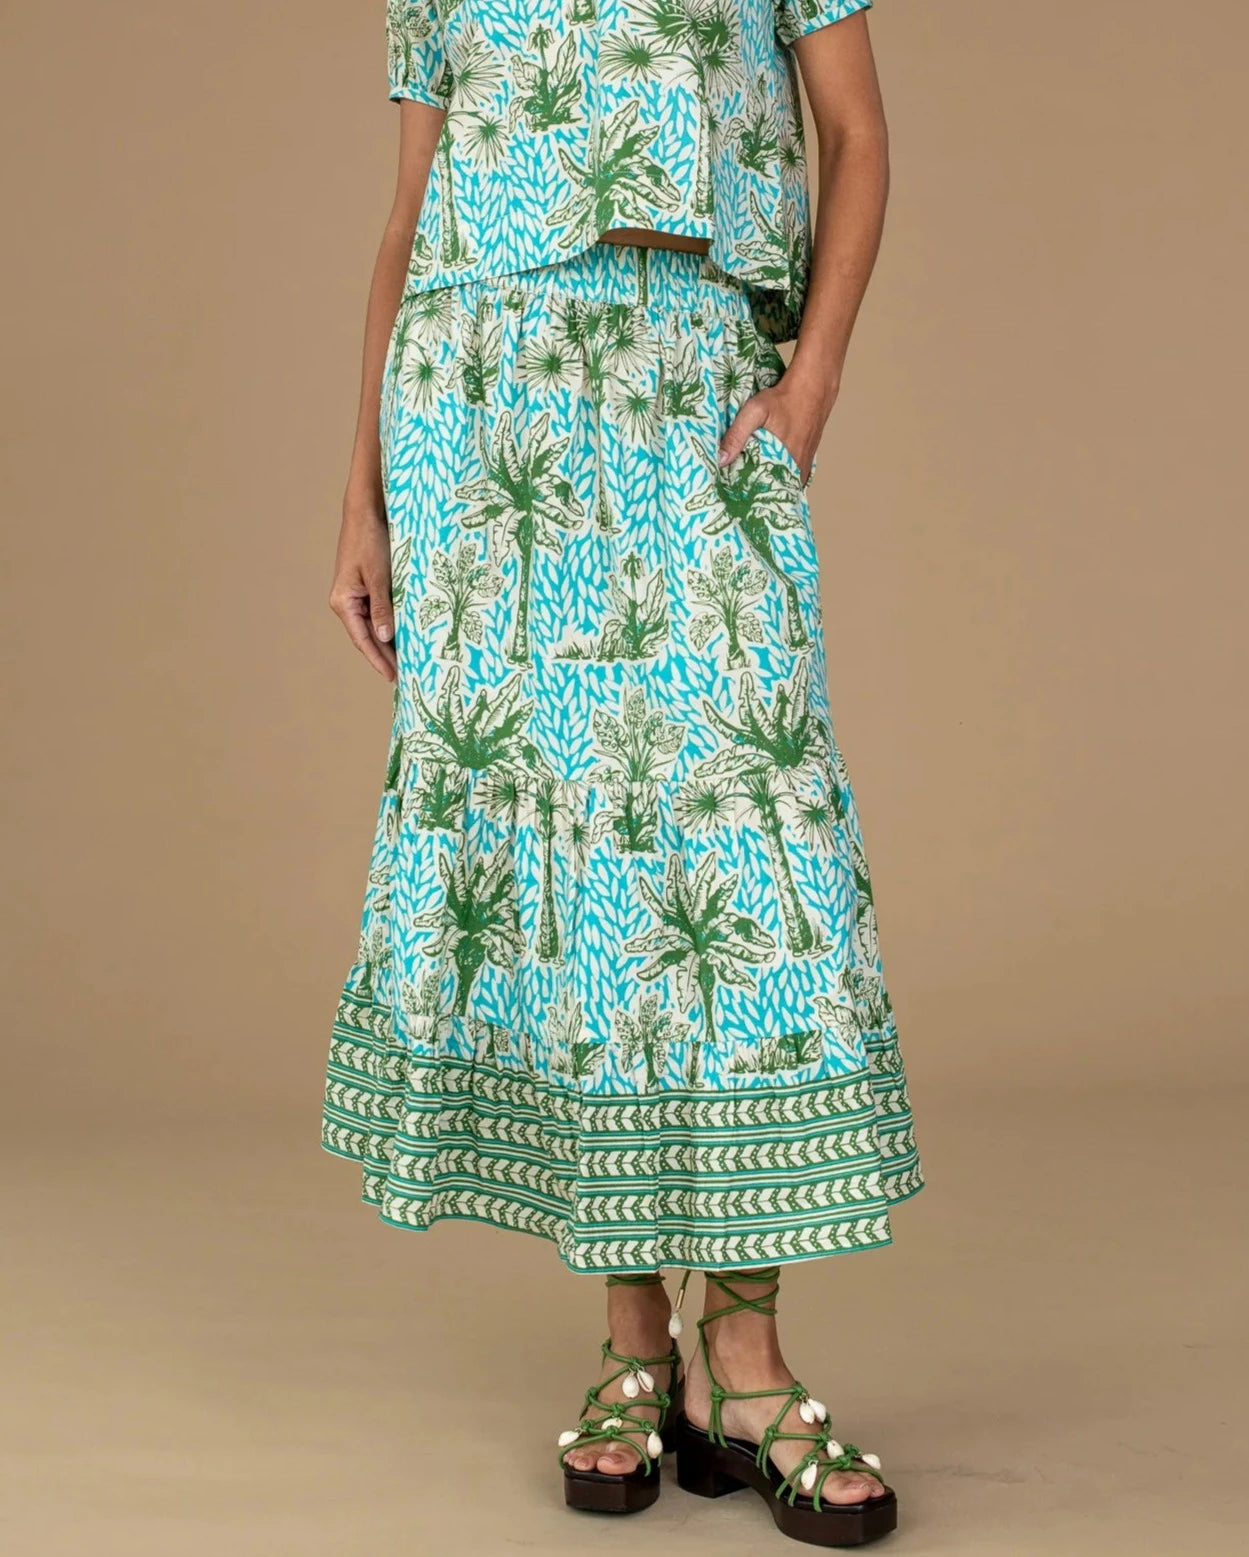 Surrey Skirt in Island Palm by Olivia James the Label